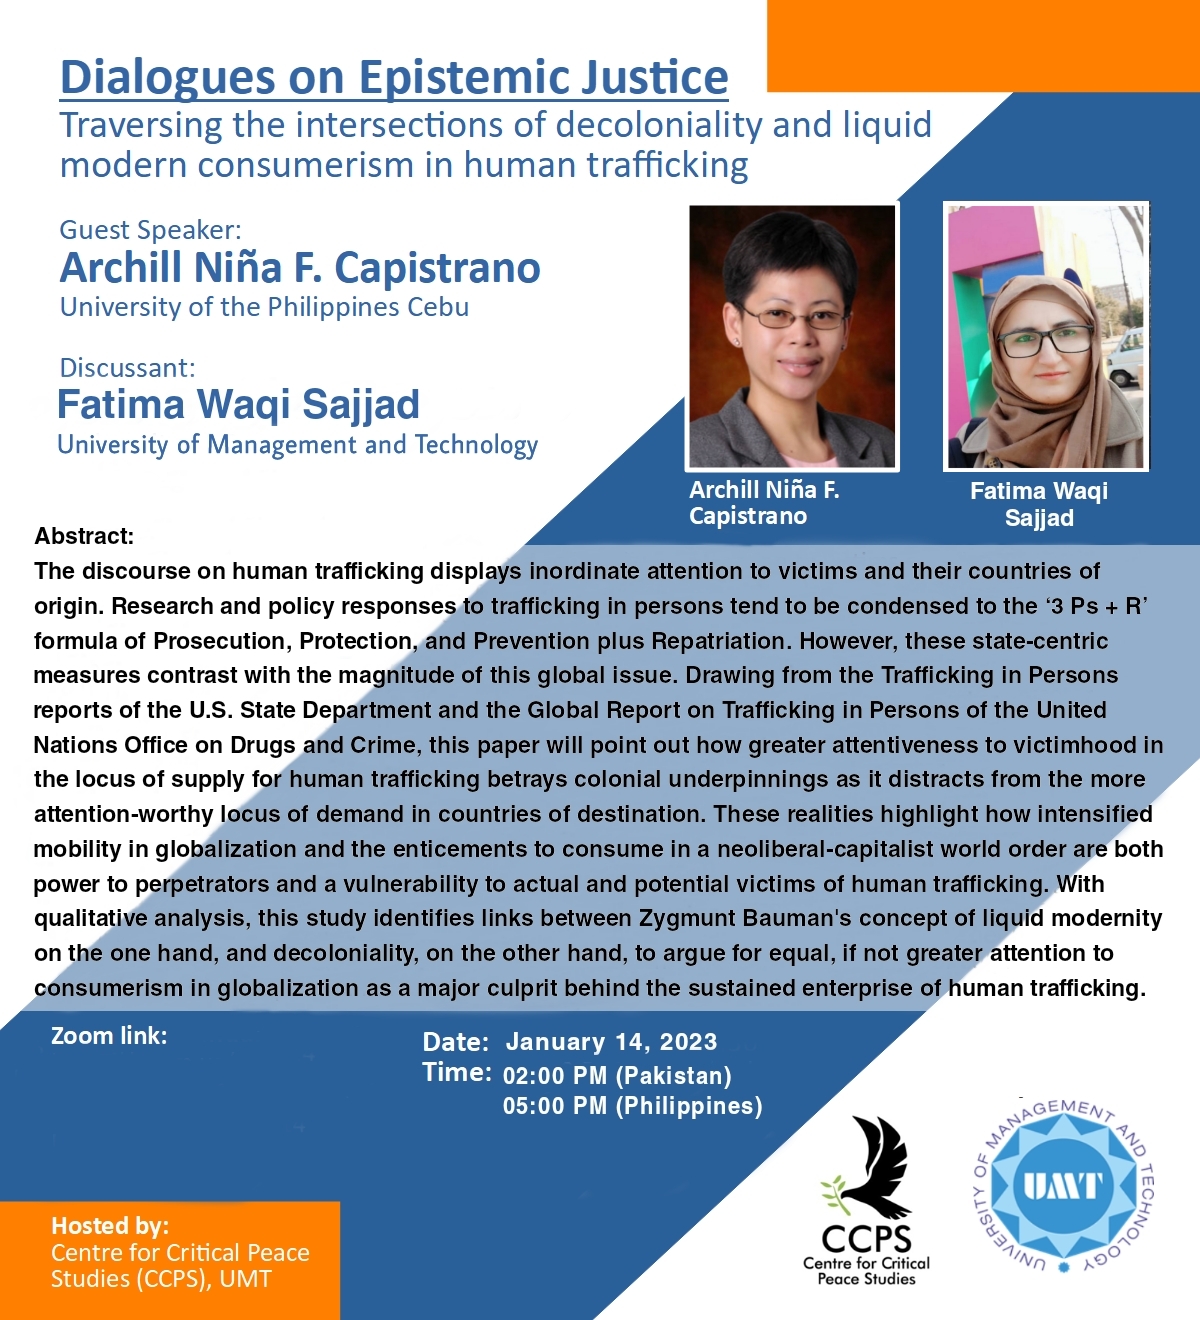 Upcoming Event: Dialogue on Epistemic Justice